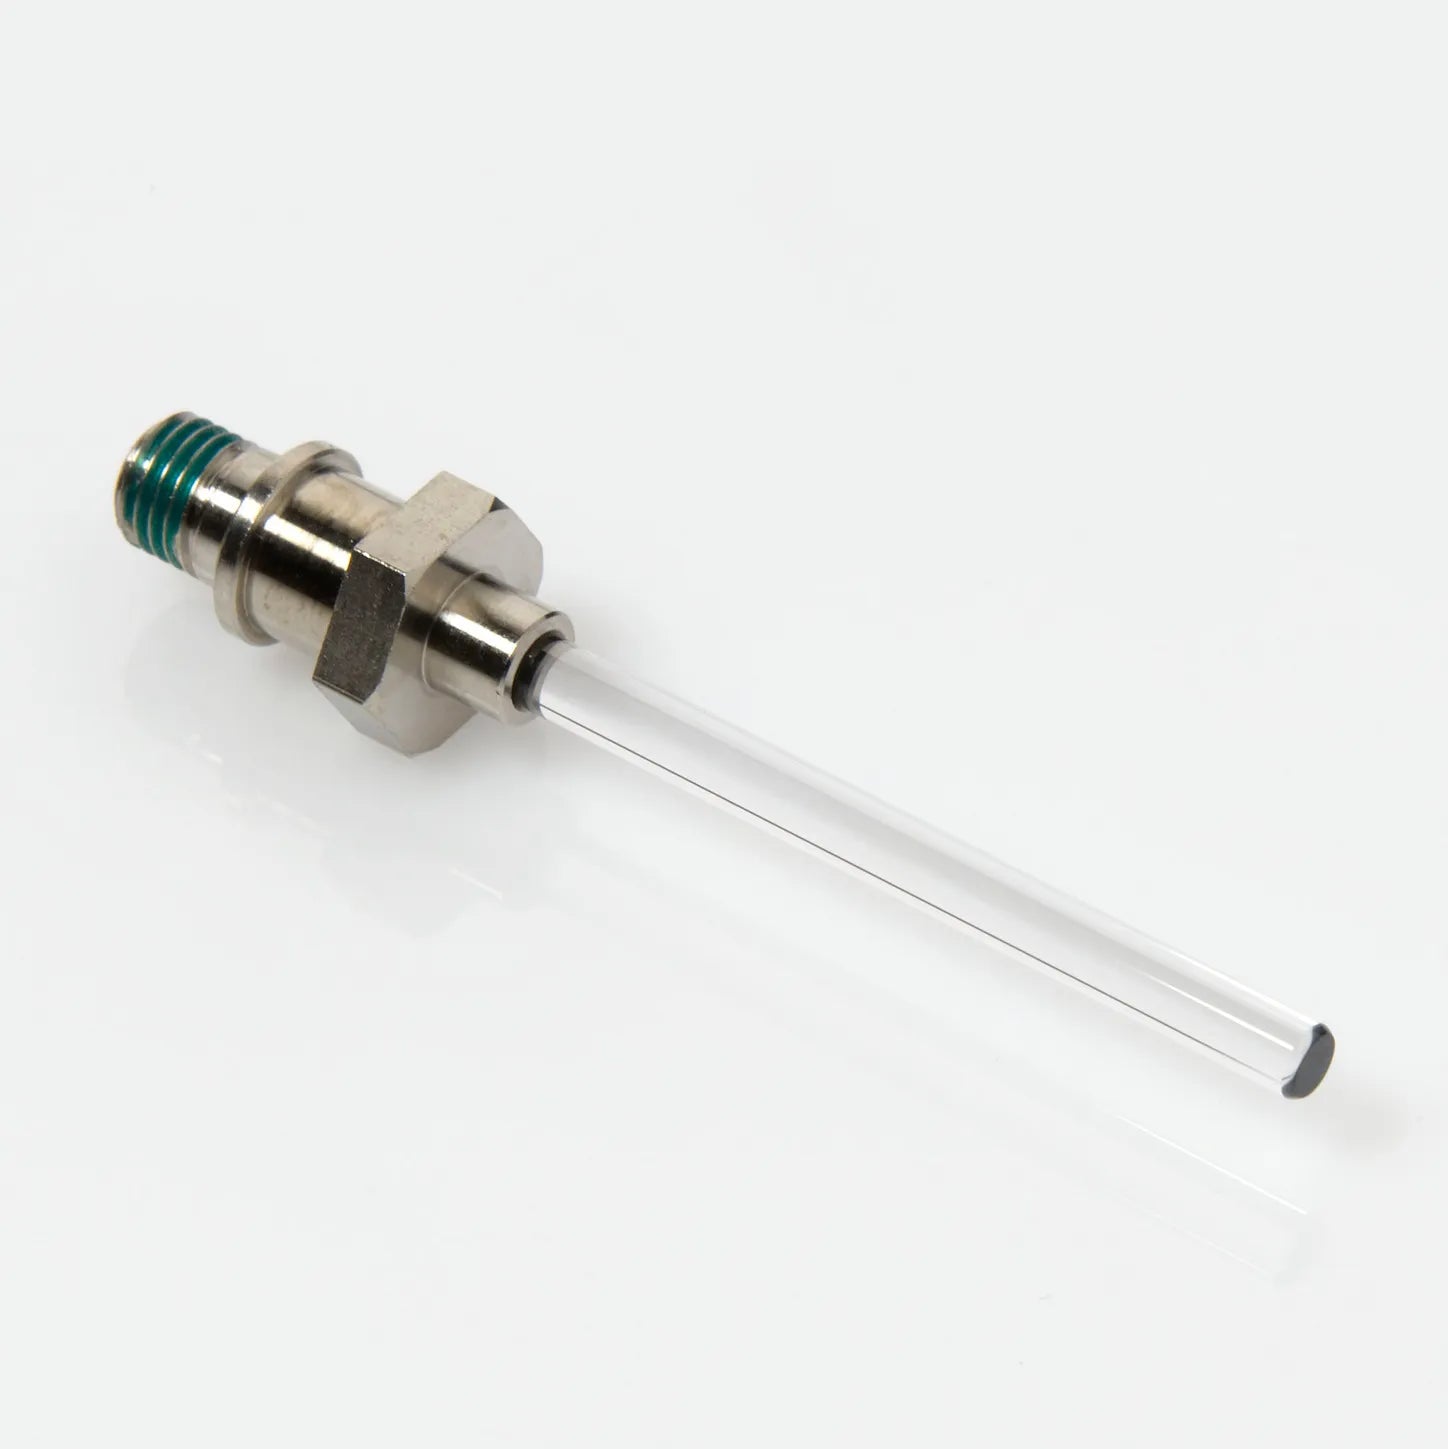 Sapphire Plunger, Comparable to Shimadzu # 228-35010-91